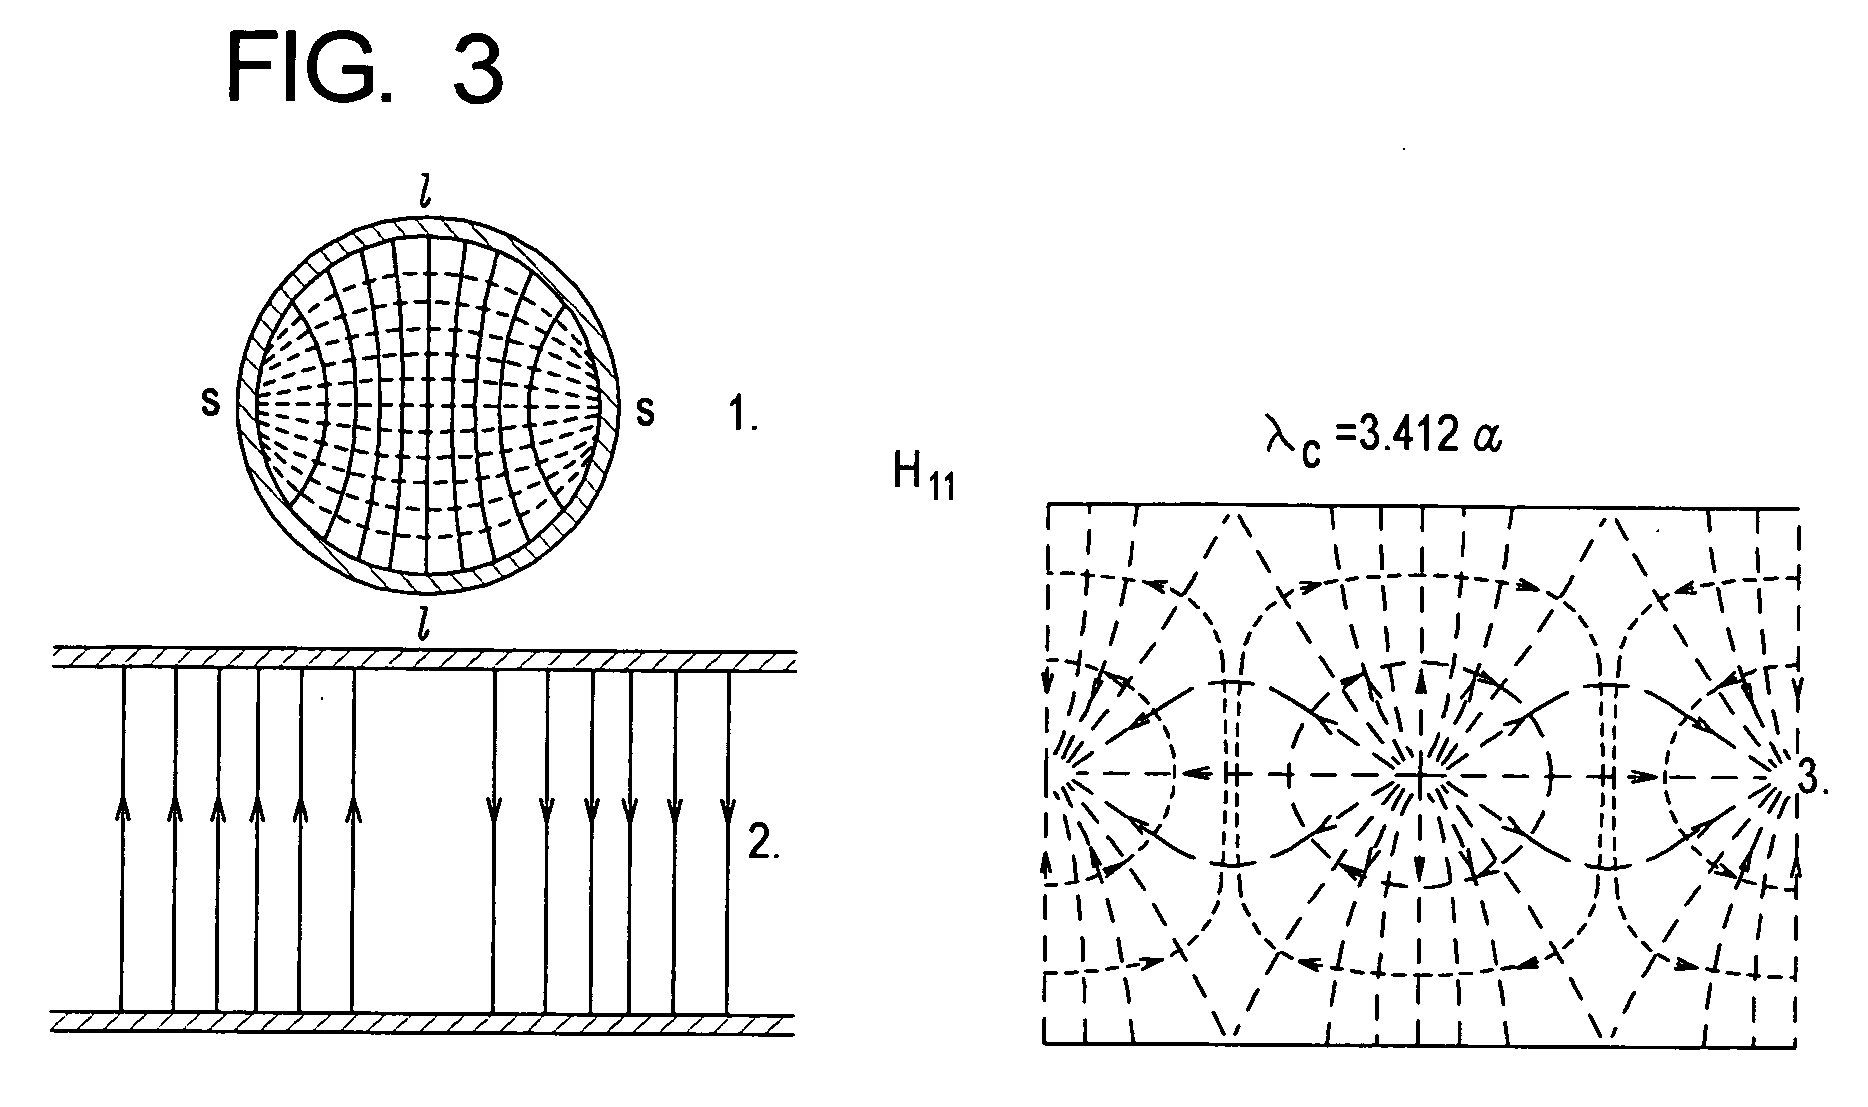 Systems and methods for detecting anomalies on internal surfaces of hollow elongate structures using time domain or frequencey domain reflectometry